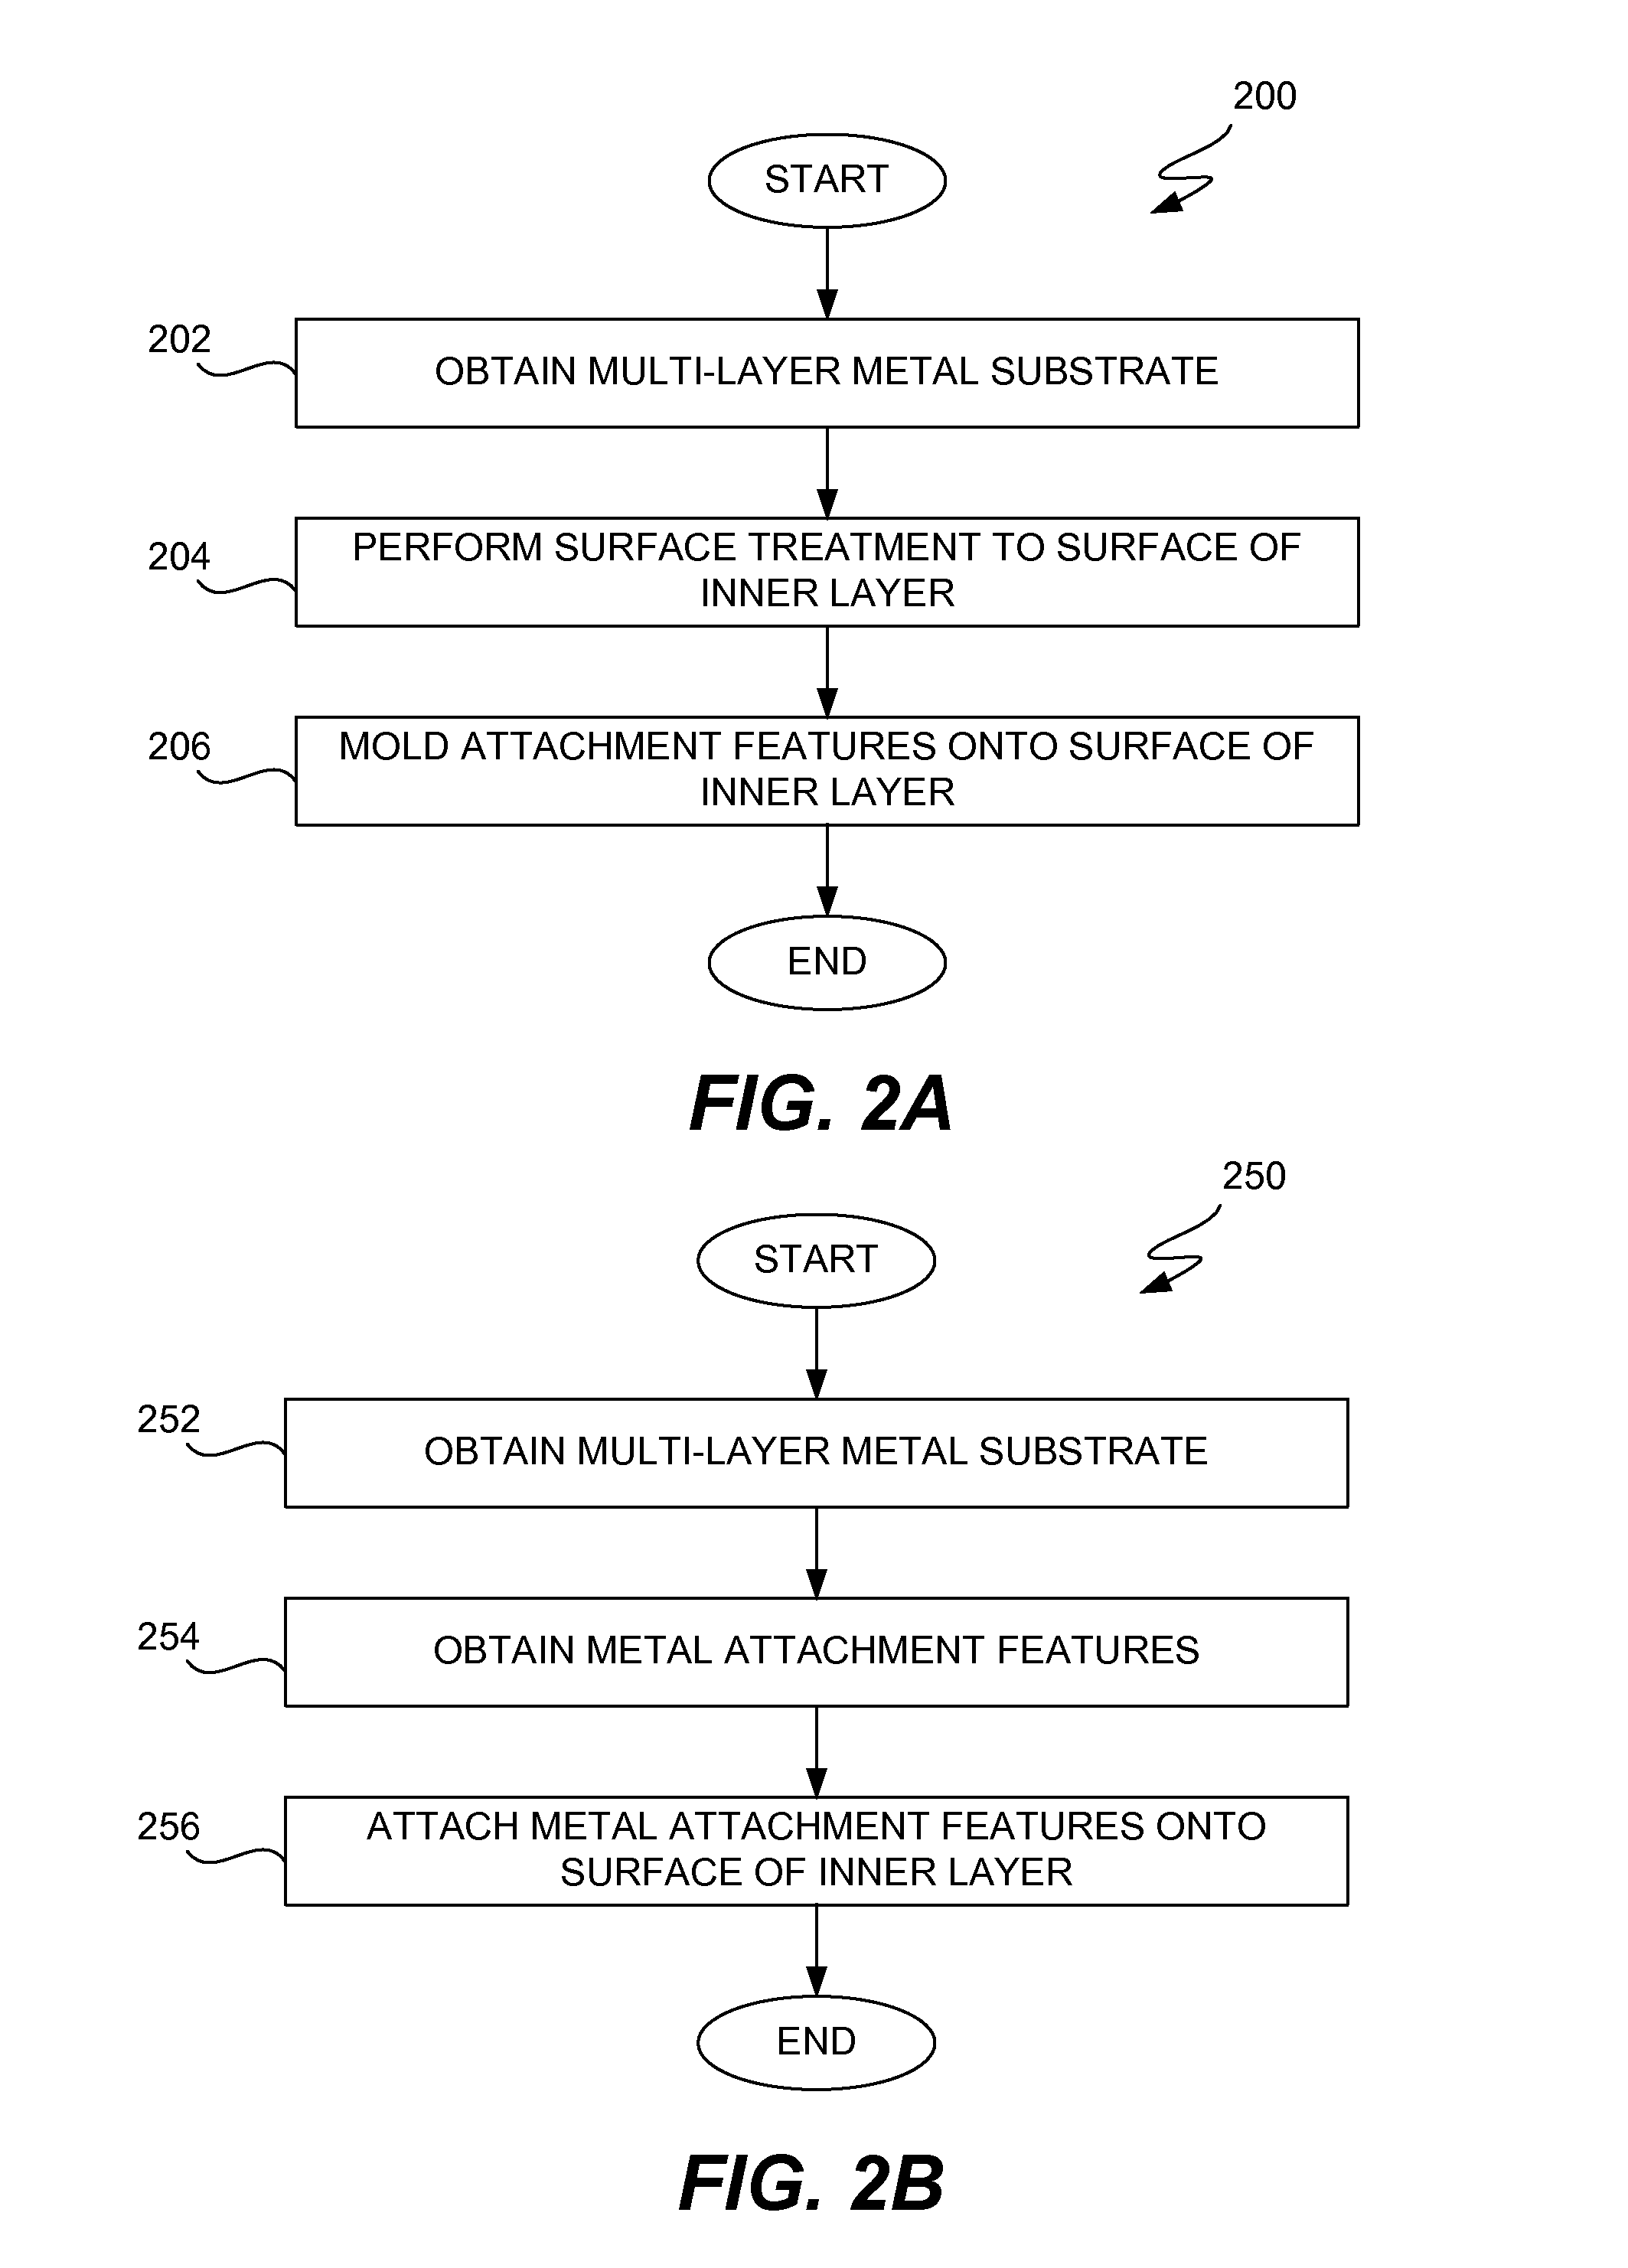 Methods and Systems for Forming Housings From Multi-Layer Materials